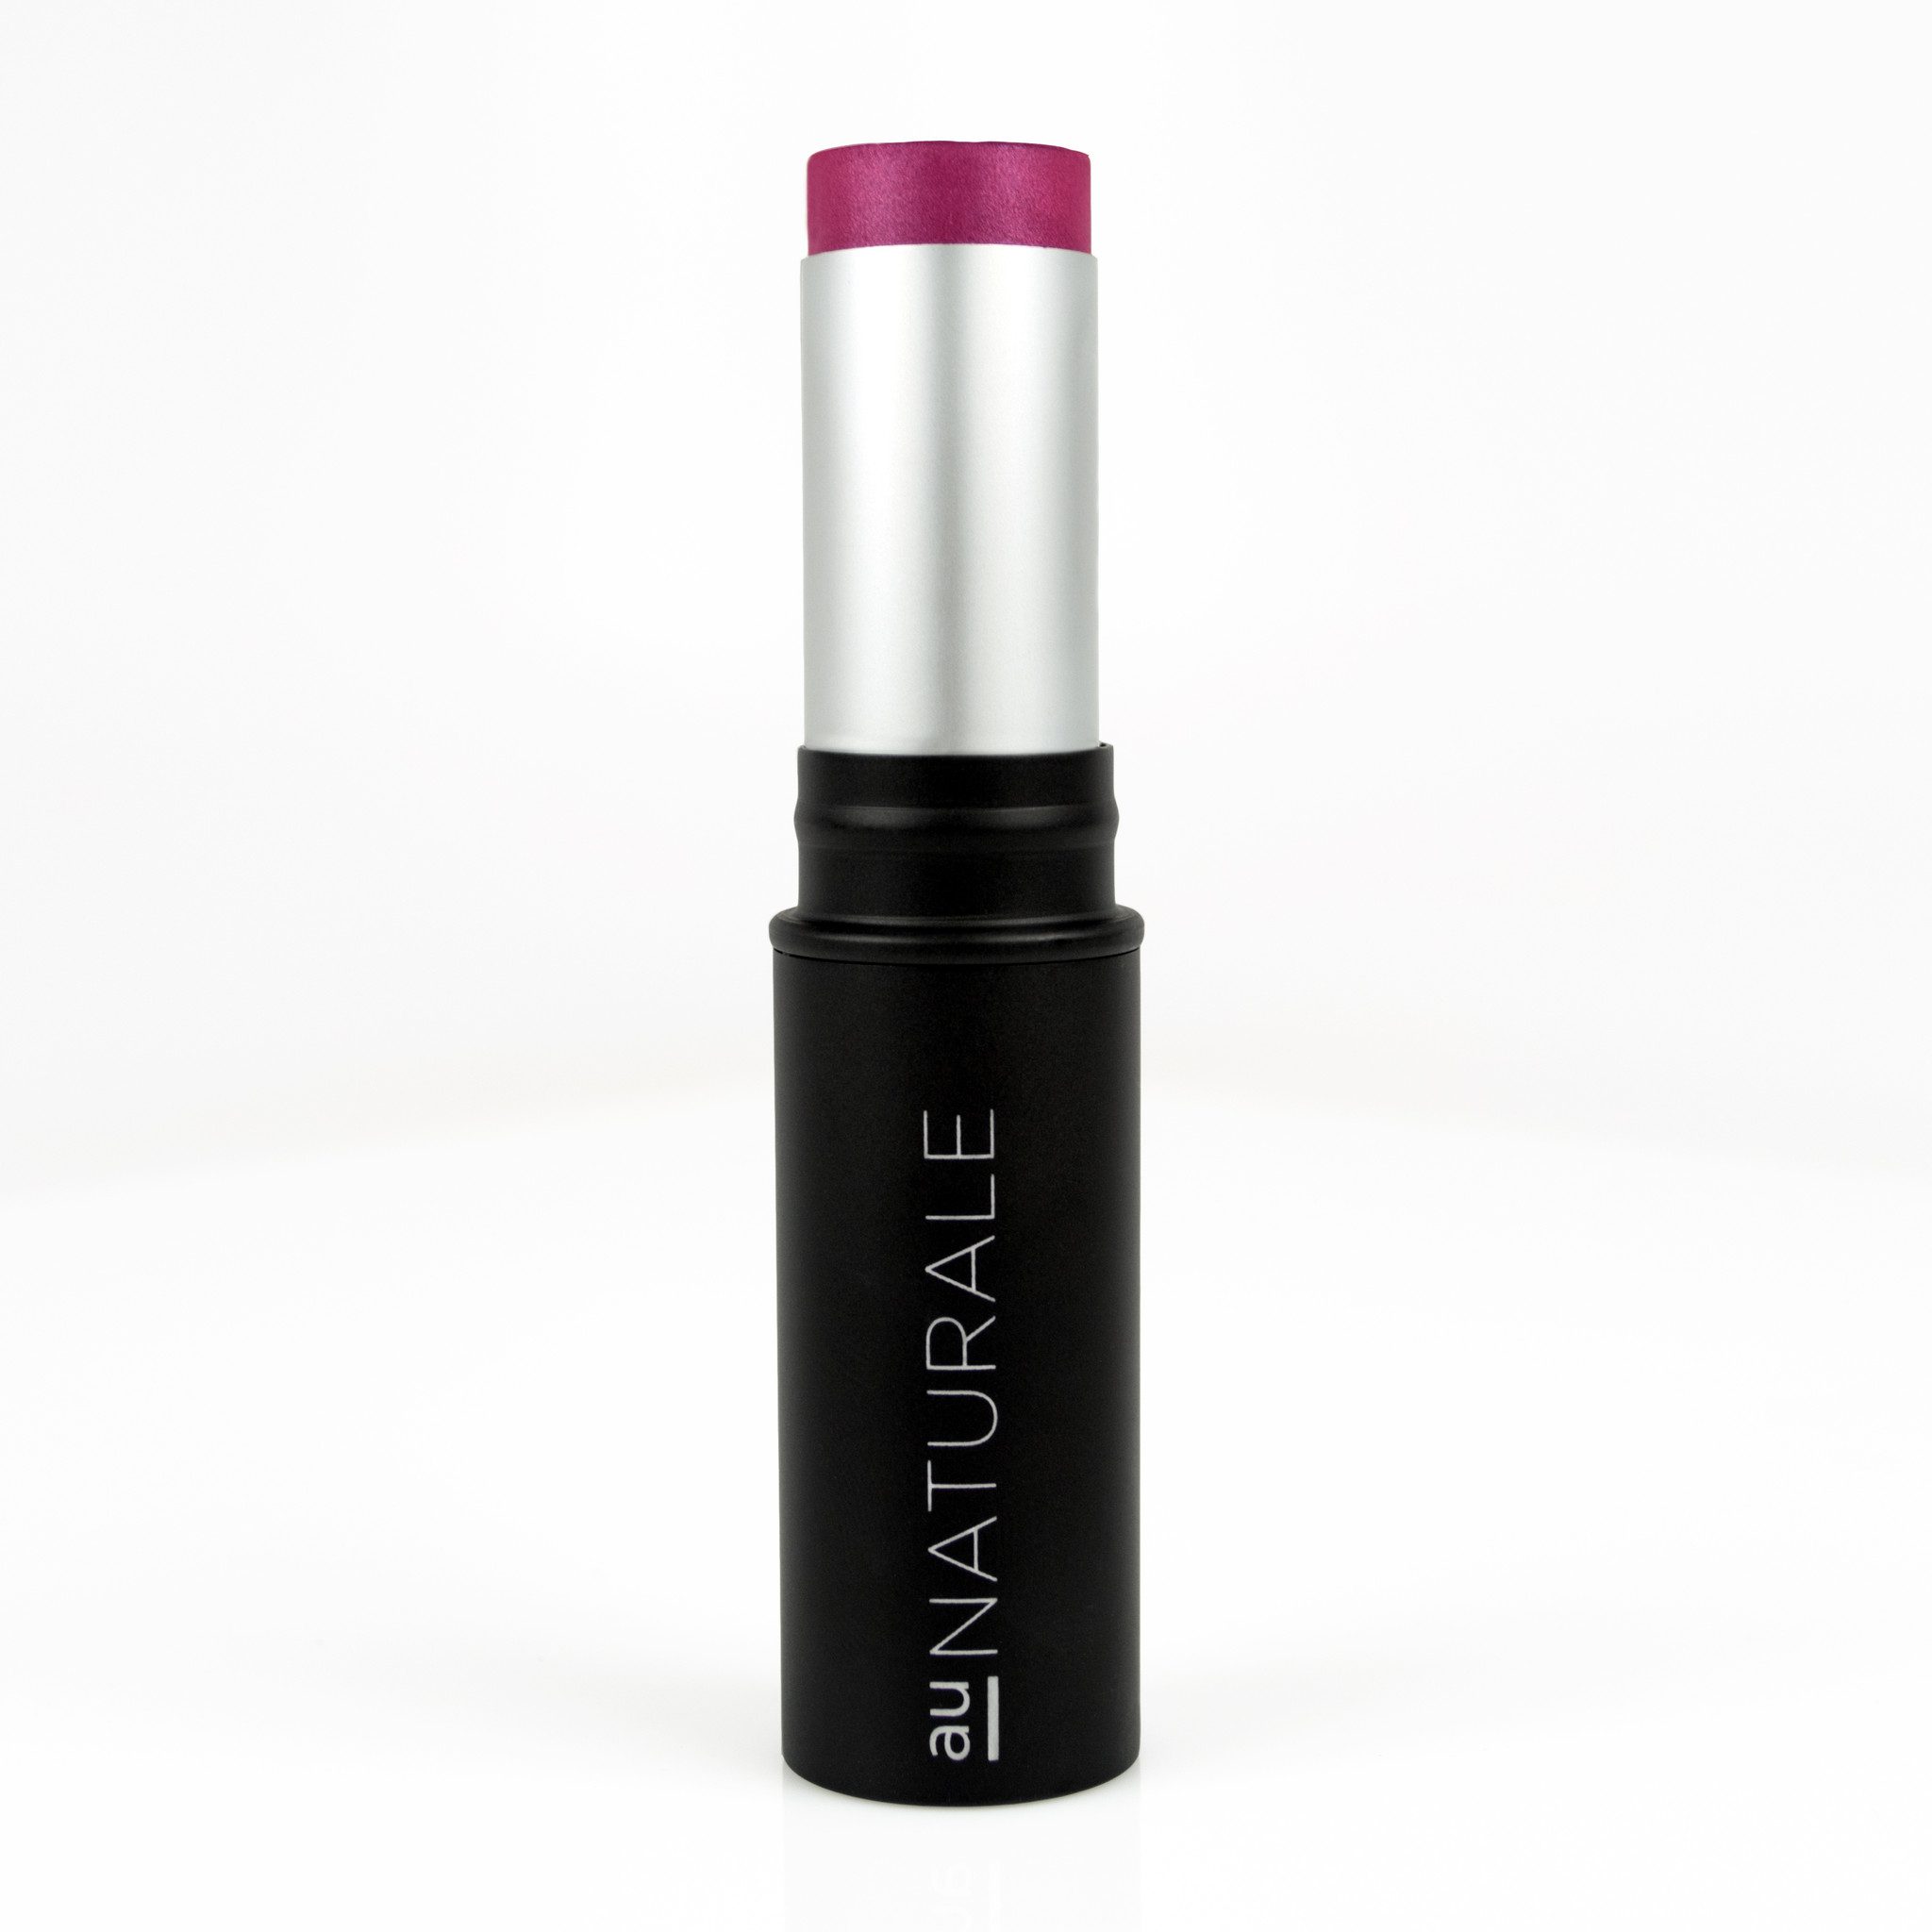 Ribkoff ombre cream how without makeup apply to lip